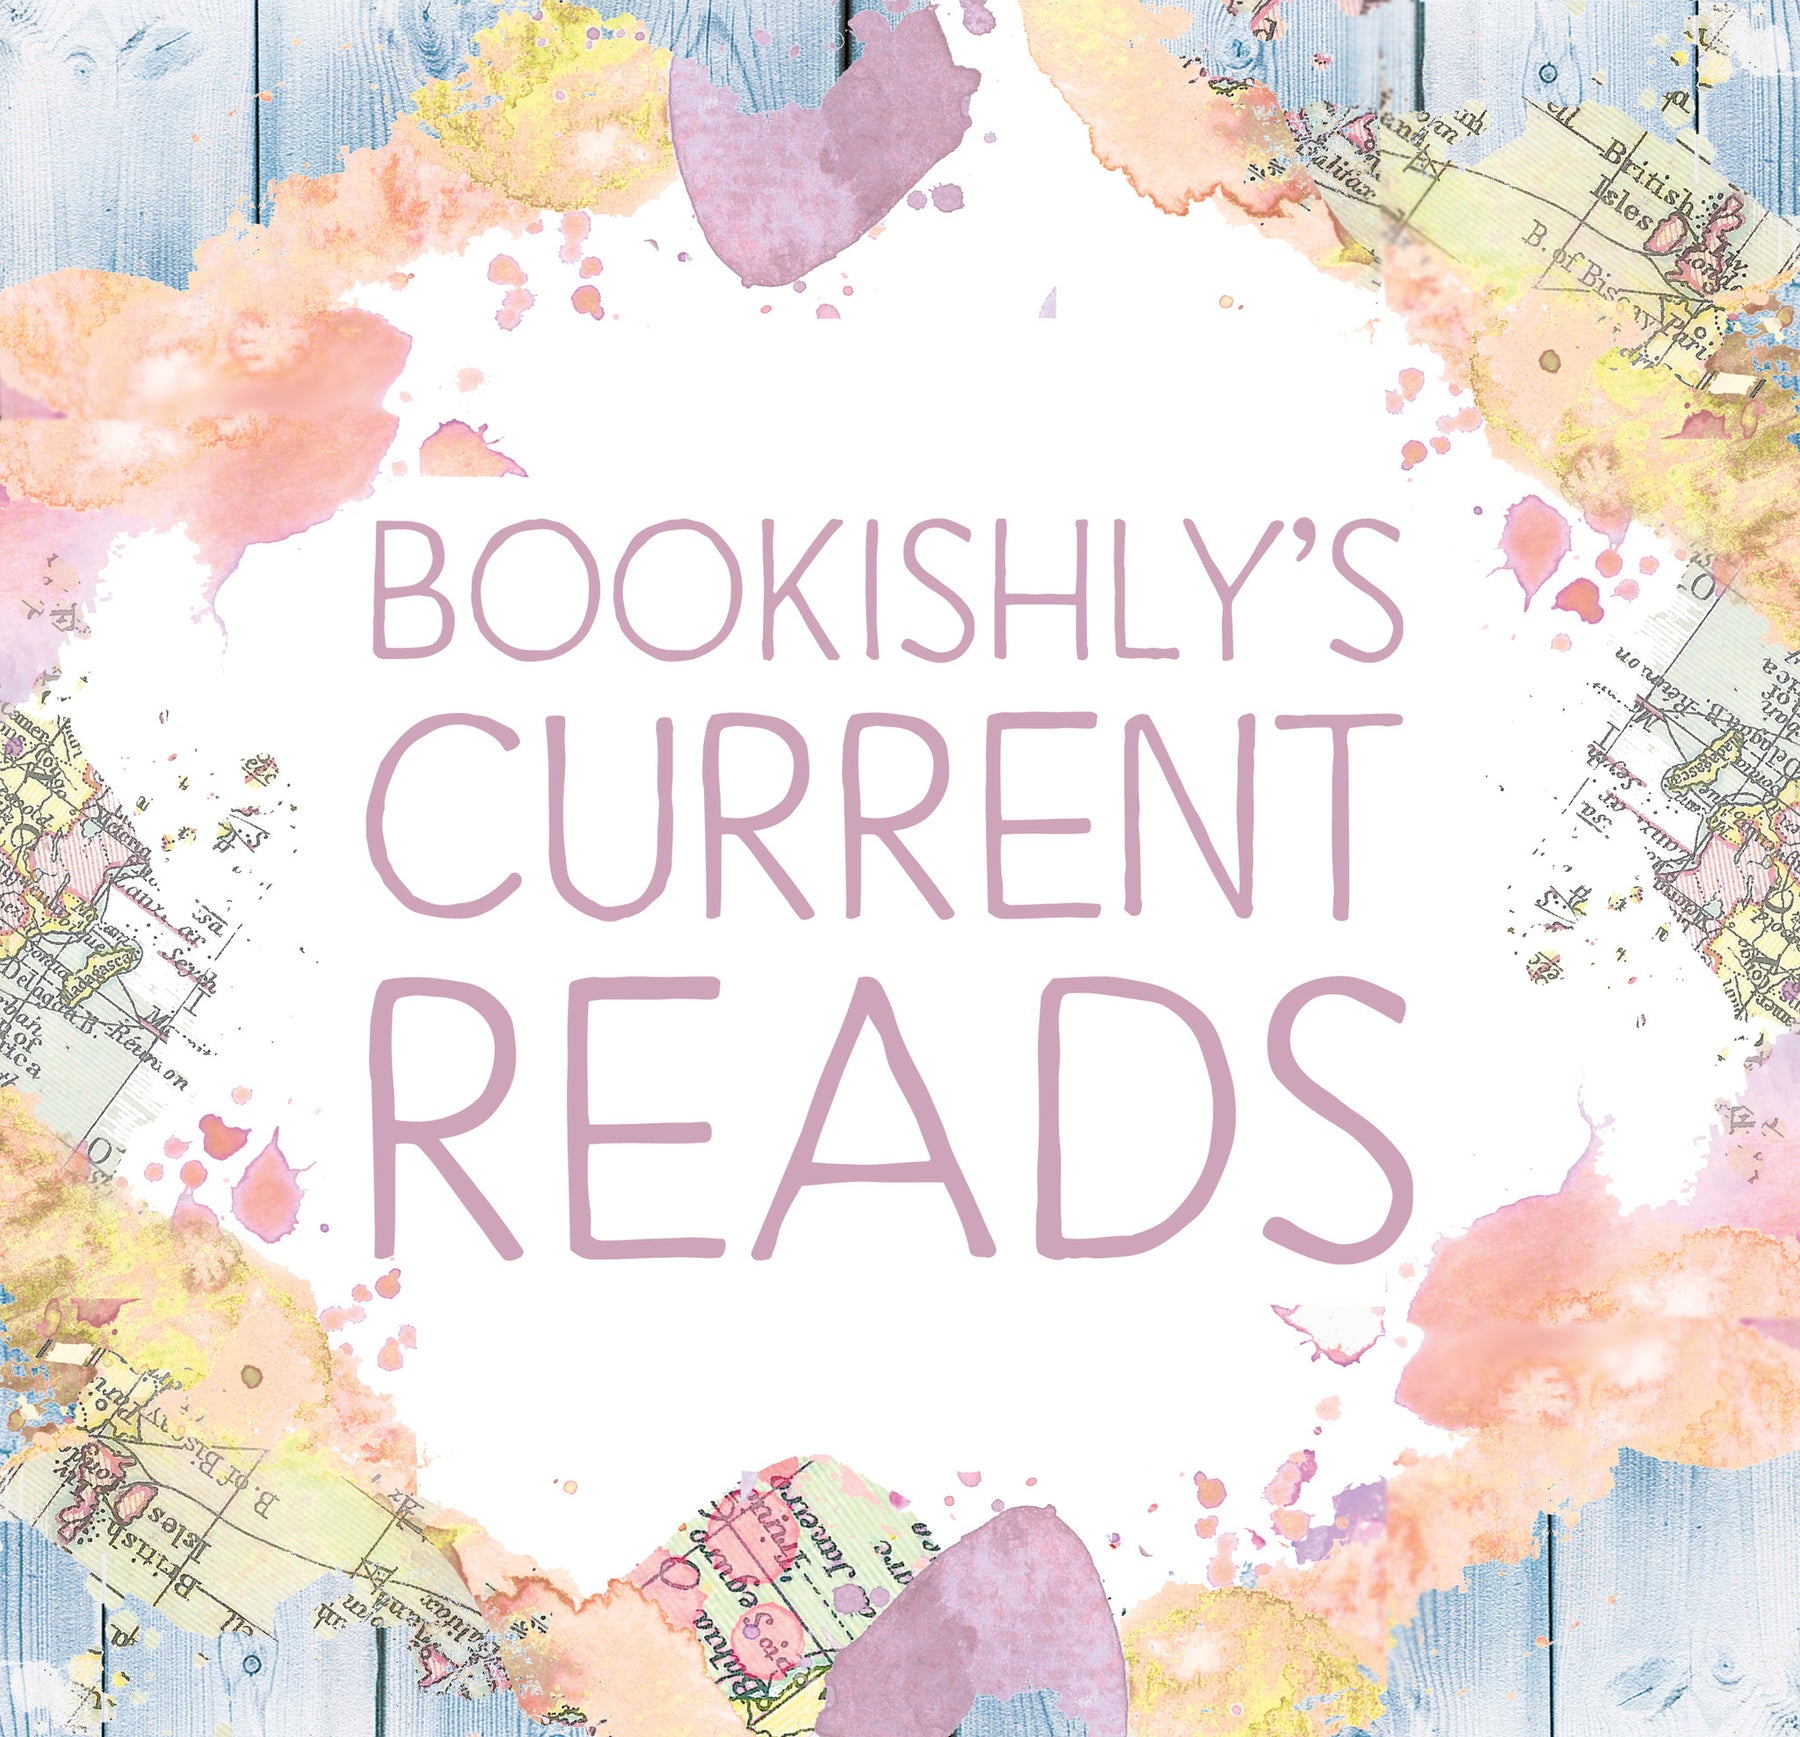 Bookishly's Current Reads!